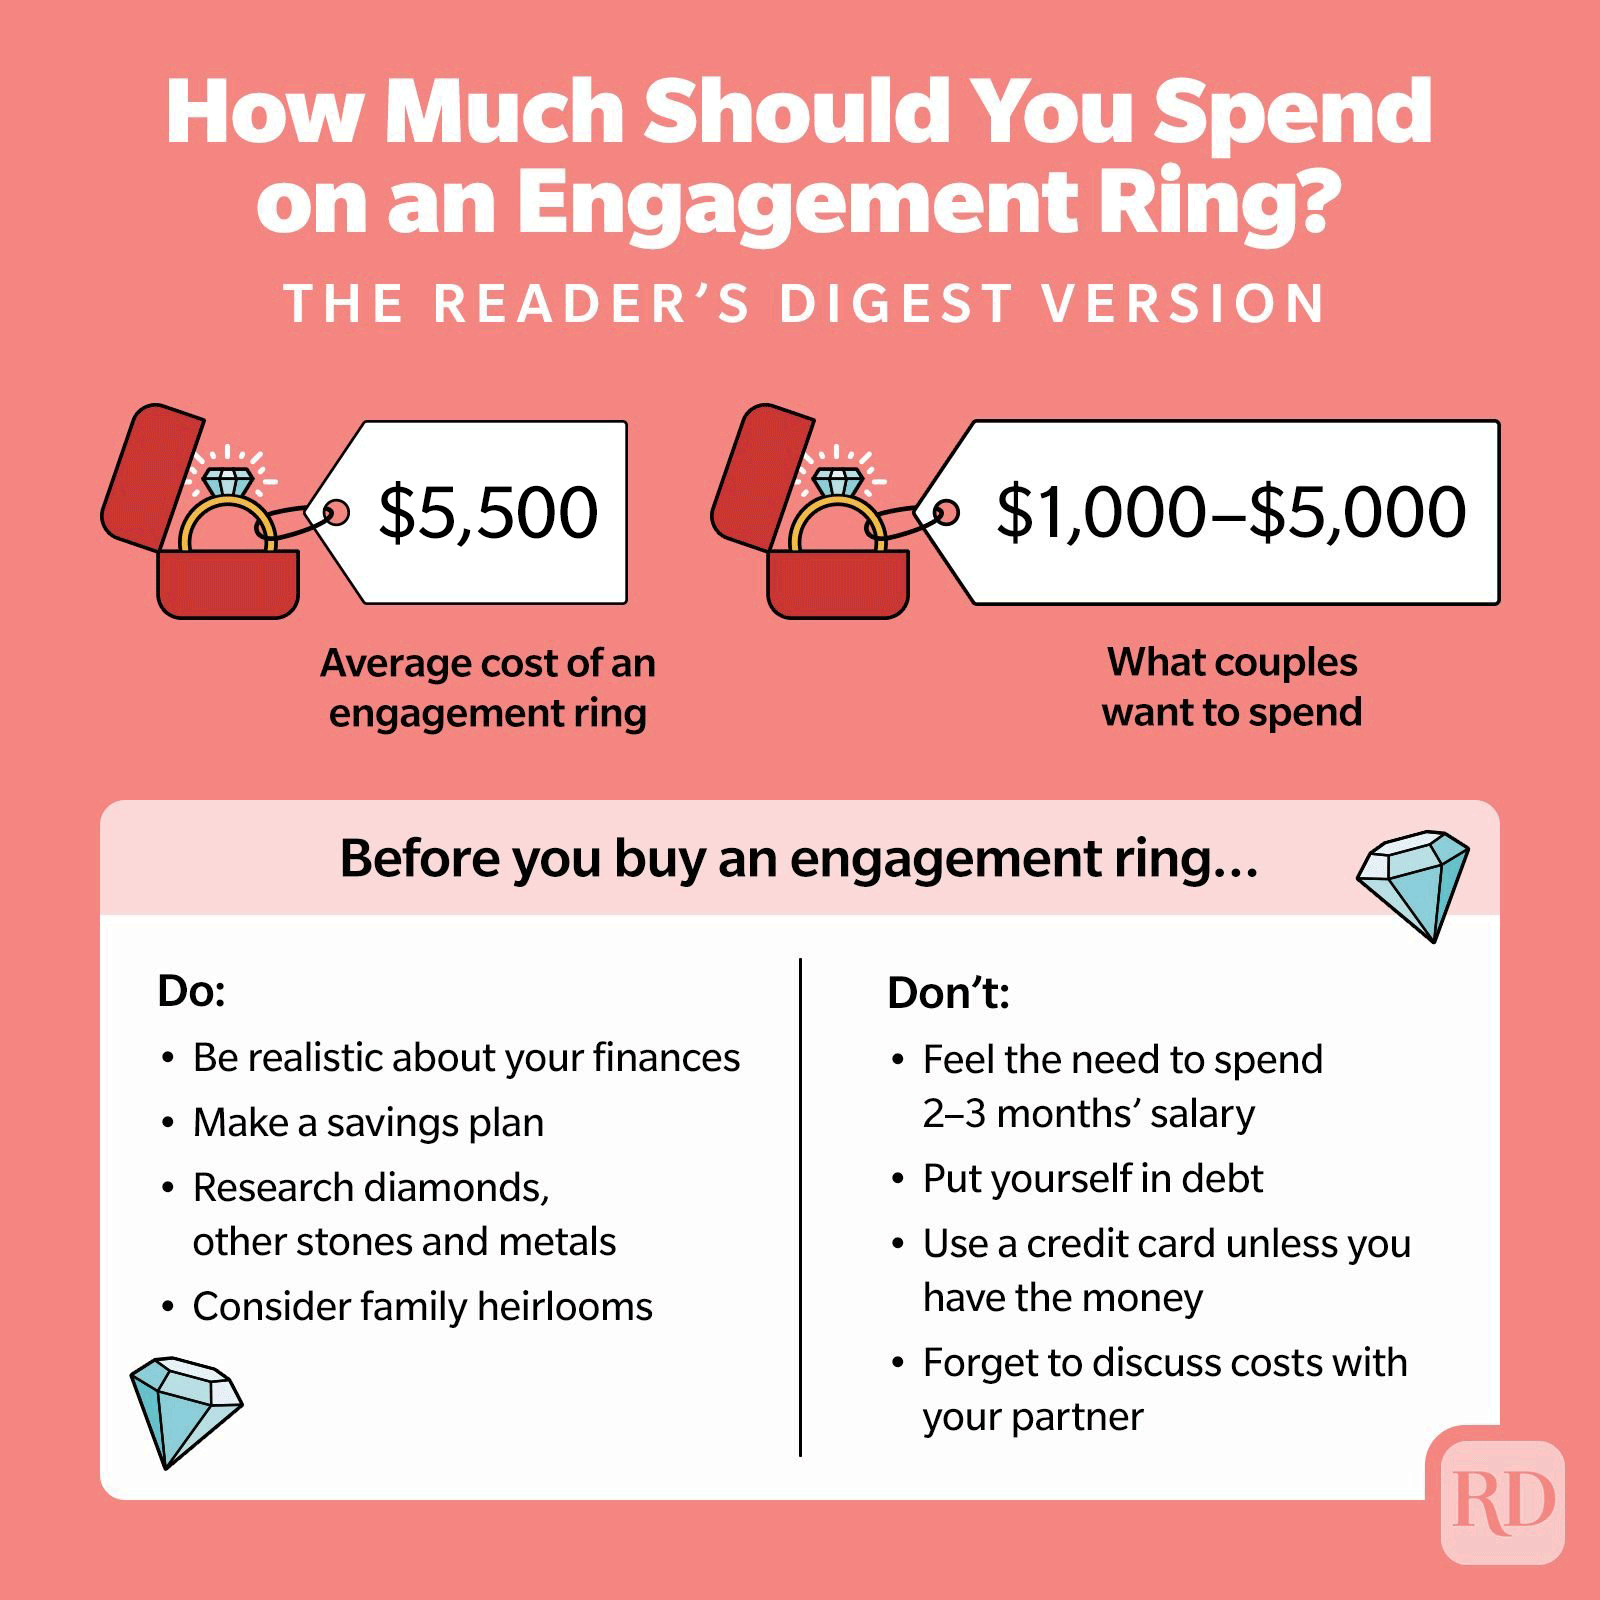 How Much Should You Spend On An Engagement Ring Infographic Gettyimages2 V2